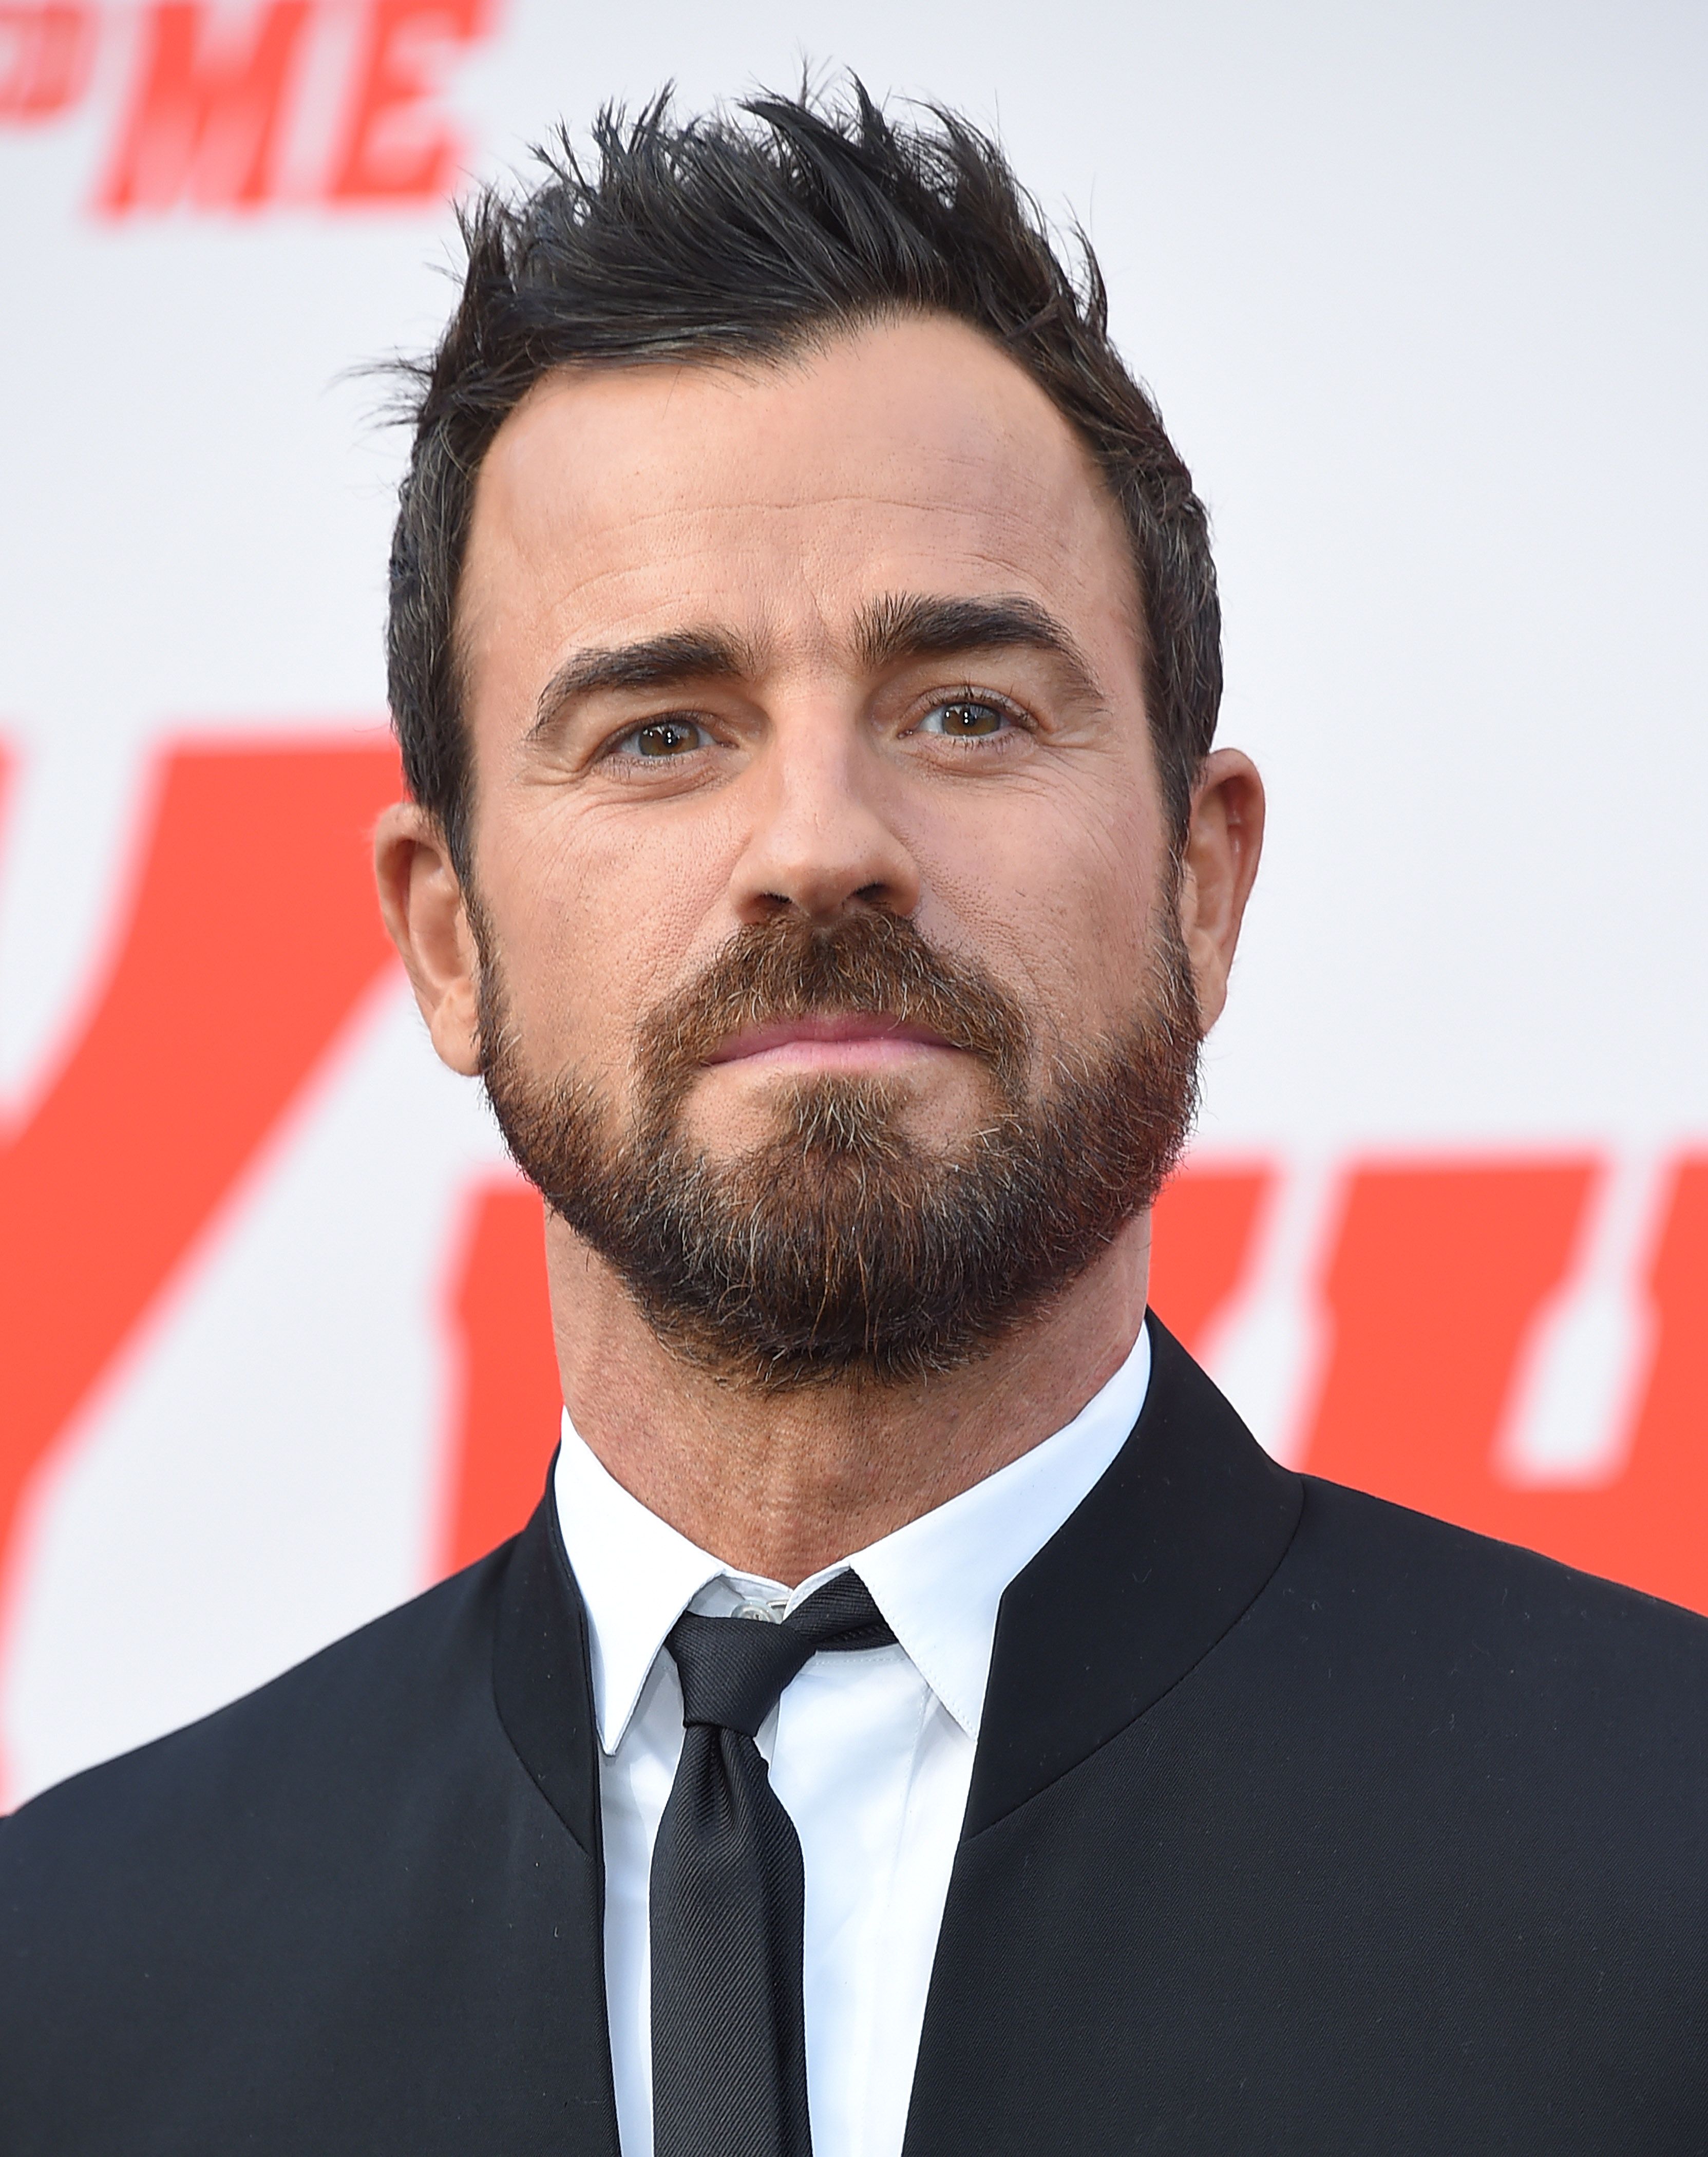 Justin Theroux wears a suit and tie.